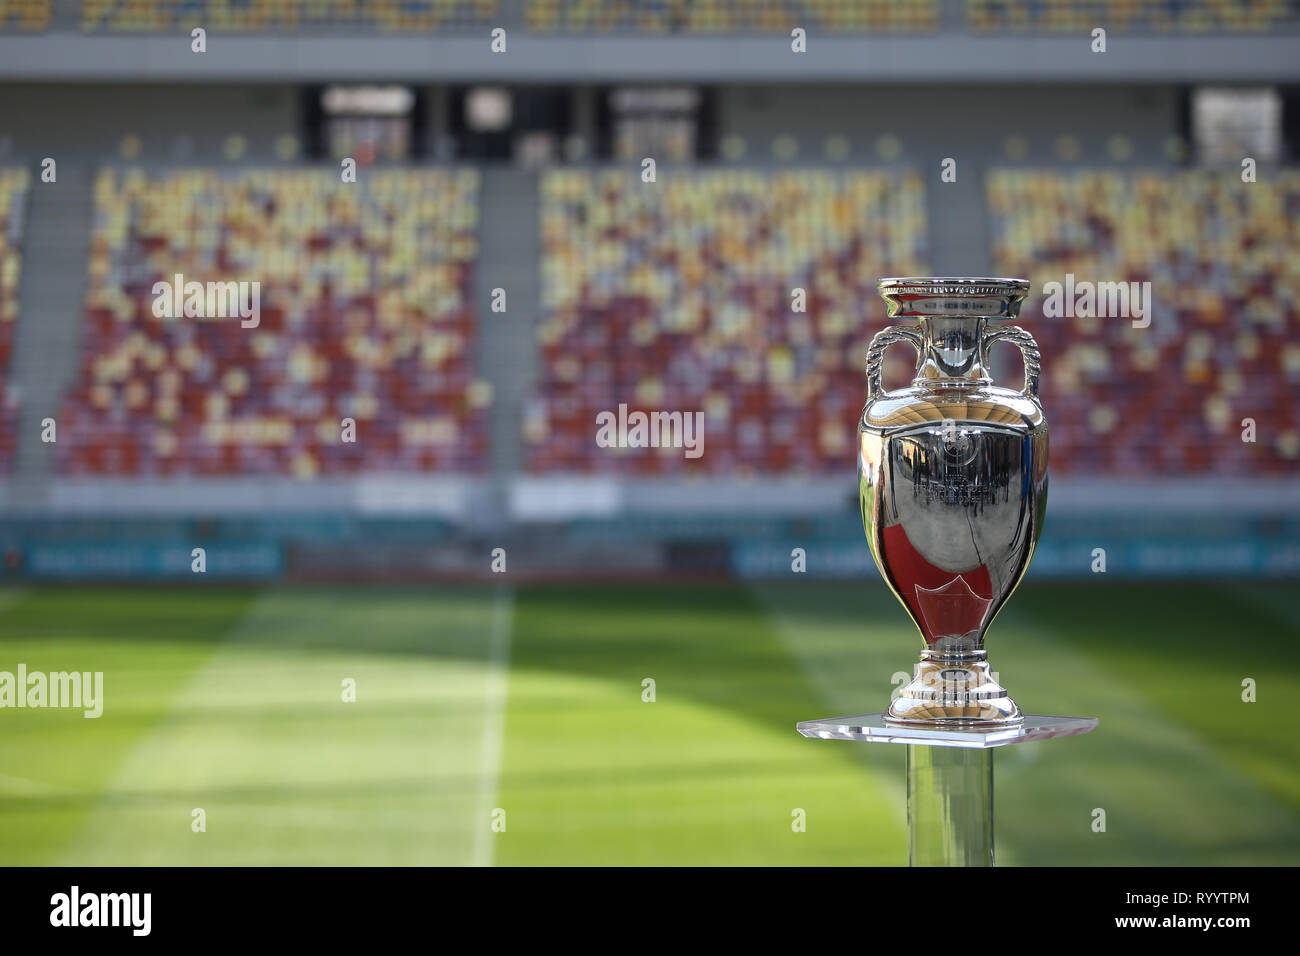 Bucharest, Romania - March 16, 2019: The original UEFA Euro 2020 tournament trophy is being presented to the public on the National Arena Stadium in B Stock Photo